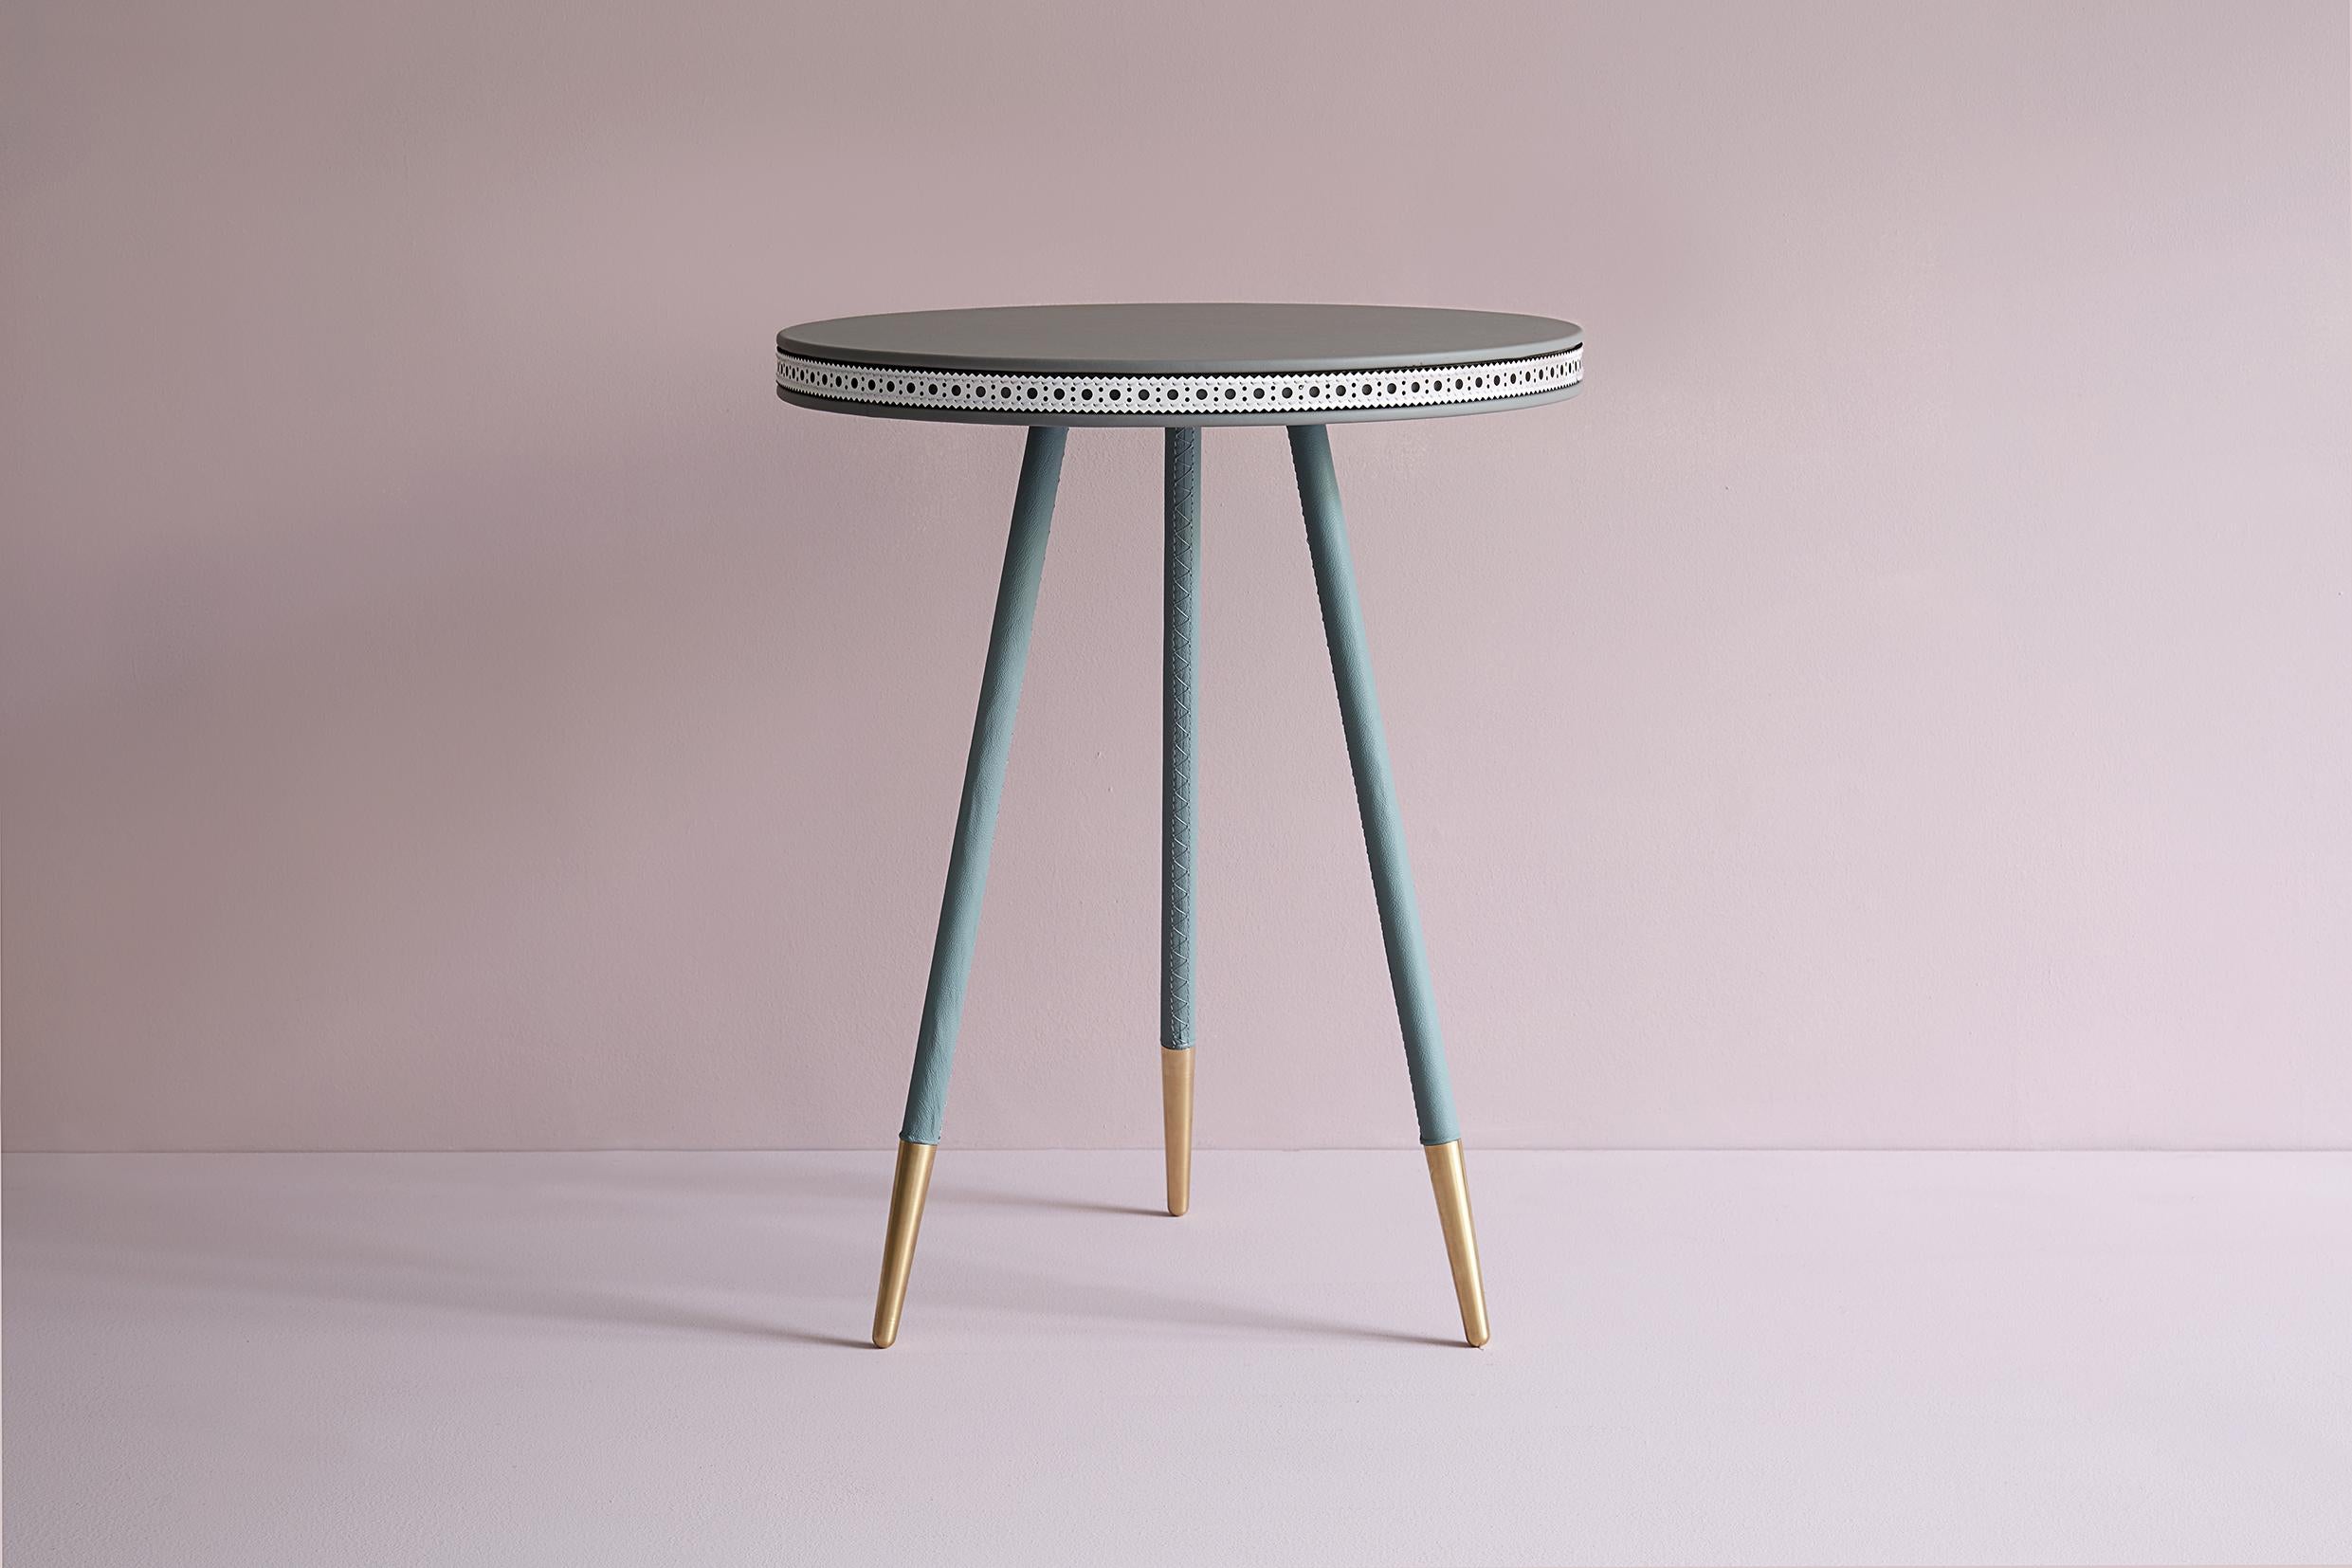 Bethan Gray has taken inspiration from the Classic brogue shoe, to develop the aesthetic on her Brogue range of tables.
The brogue shoe traces its roots to a rudimentary shoe originating in Ireland that was constructed using untanned hide
with